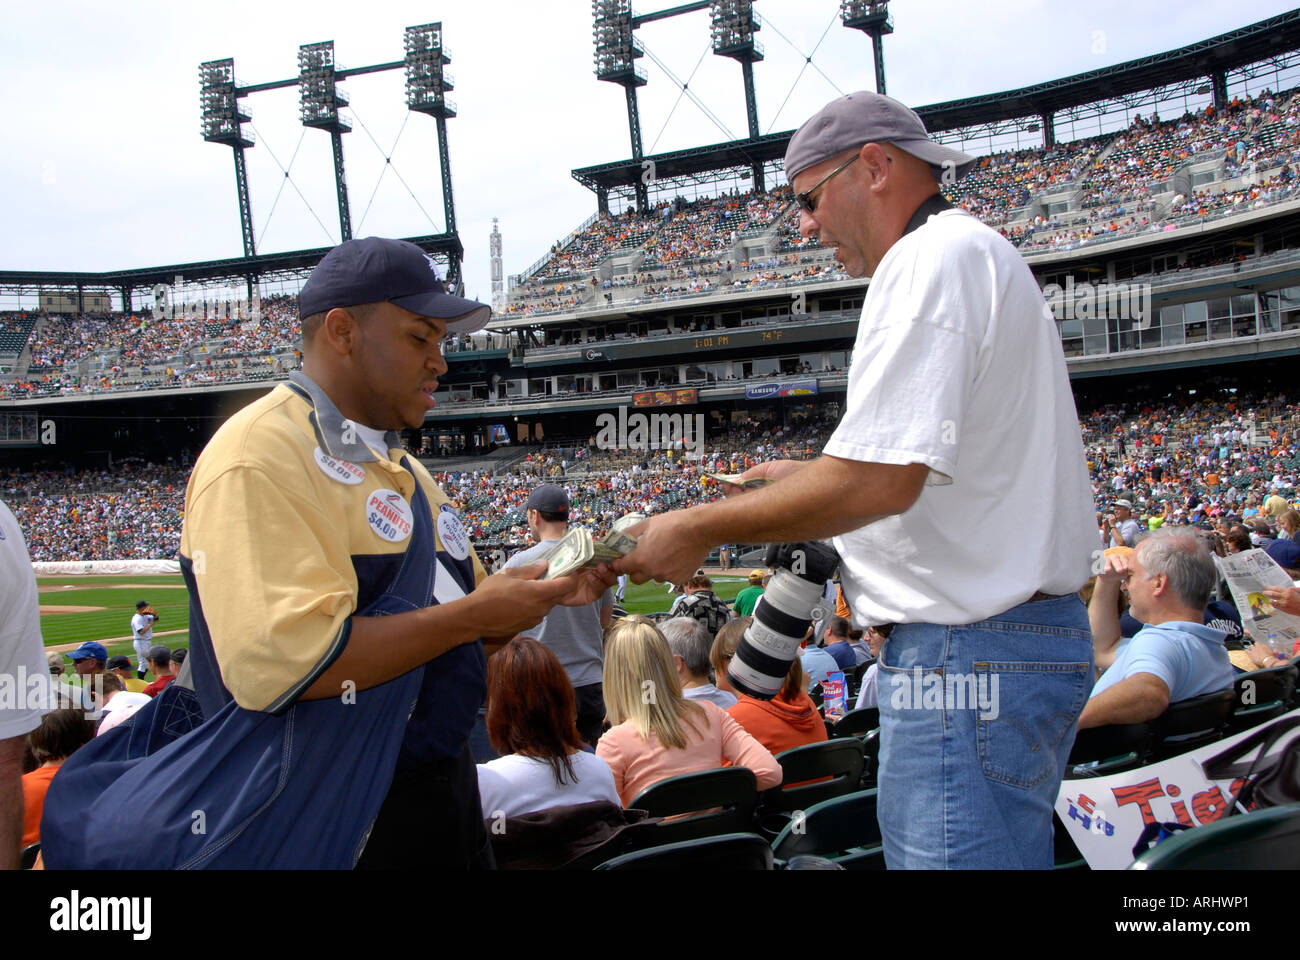 Vendors sell beer and other refreshments at a Detroit Tiger Professional Baseball game at Comerica Park Detroit Michigan Stock Photo